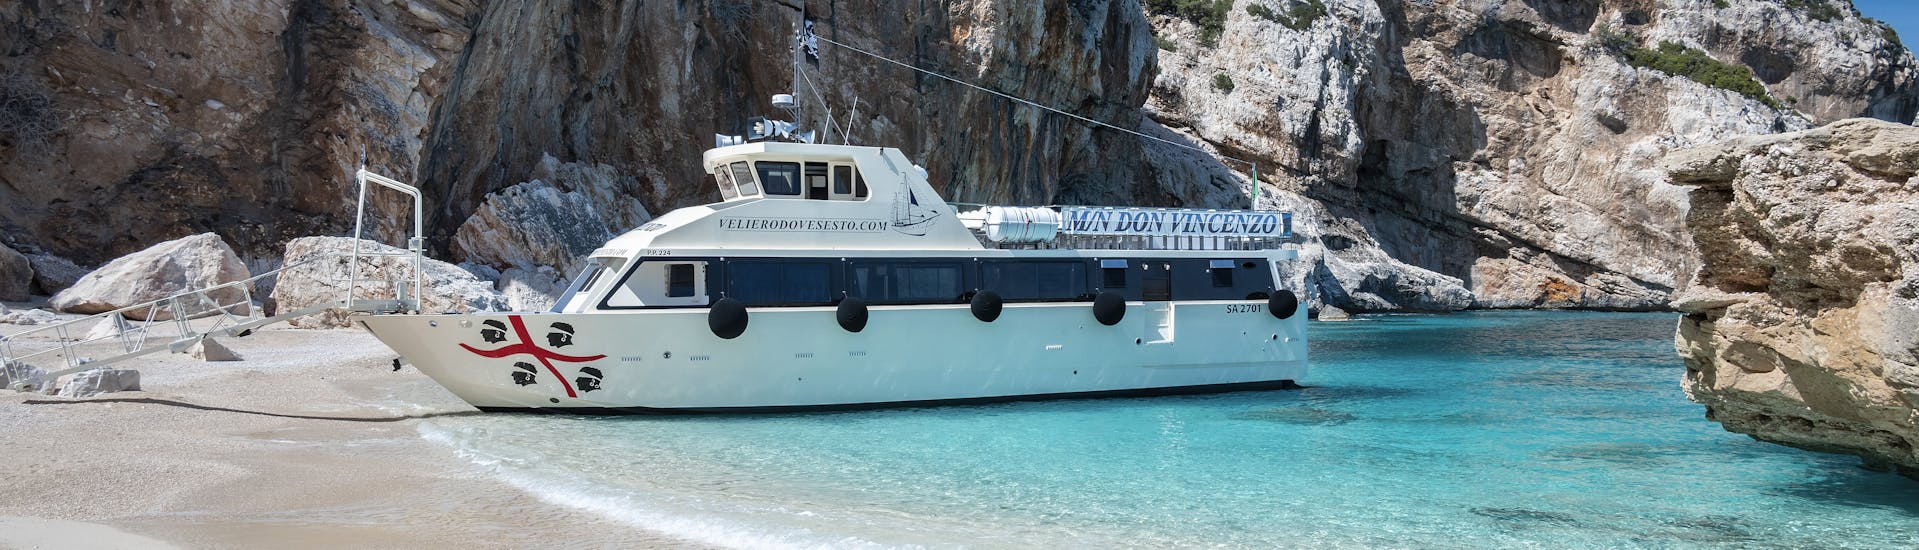 The boat you will use during the VIP Boat Trip from Cala Gonone with Stops in Cala Mariolu & Arbatax with Buffet from Dovesesto Cala Gonone.